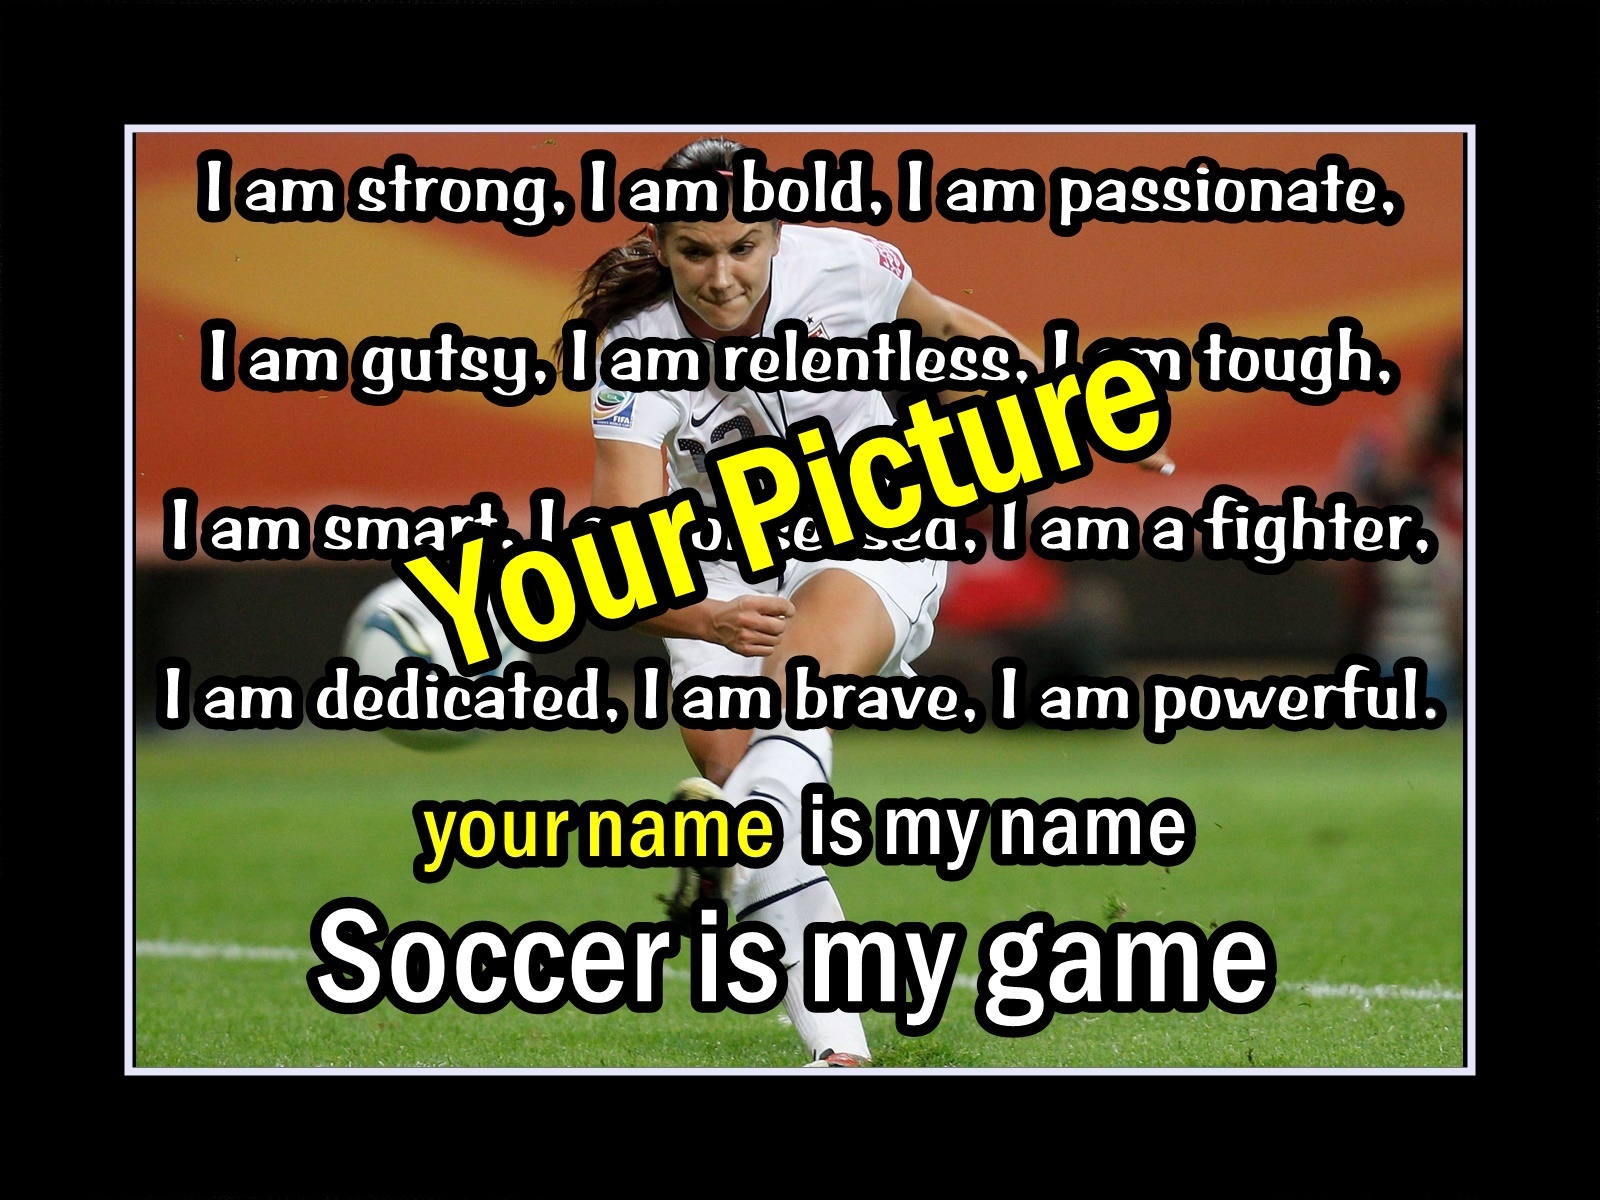 Rare Inspirational Personalized Custom Soccer Poster Unique Motivational Gift - £23.97 GBP - £39.95 GBP